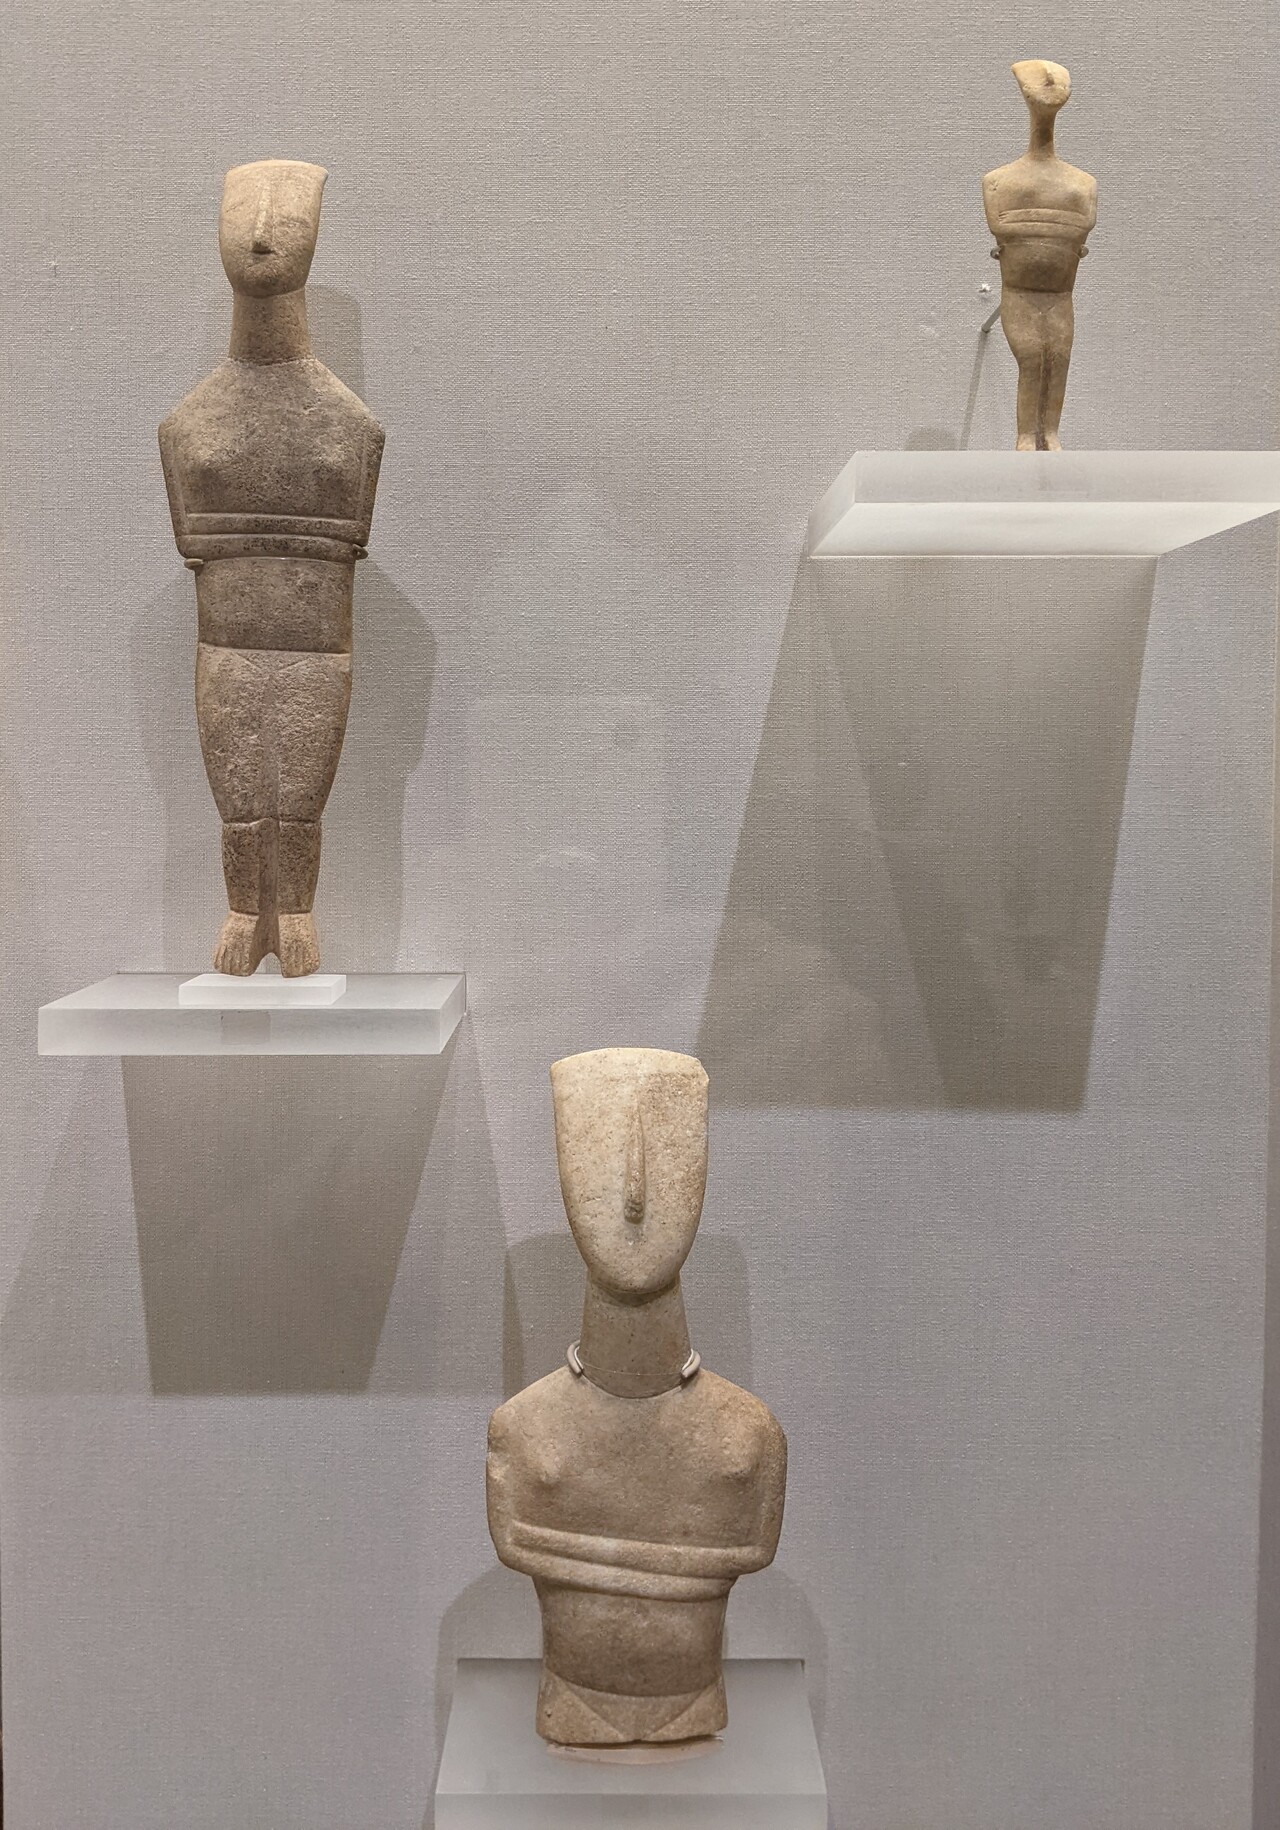 three Cycladic sculptures by the artist known as the Goulandris Master, 2500 BCE